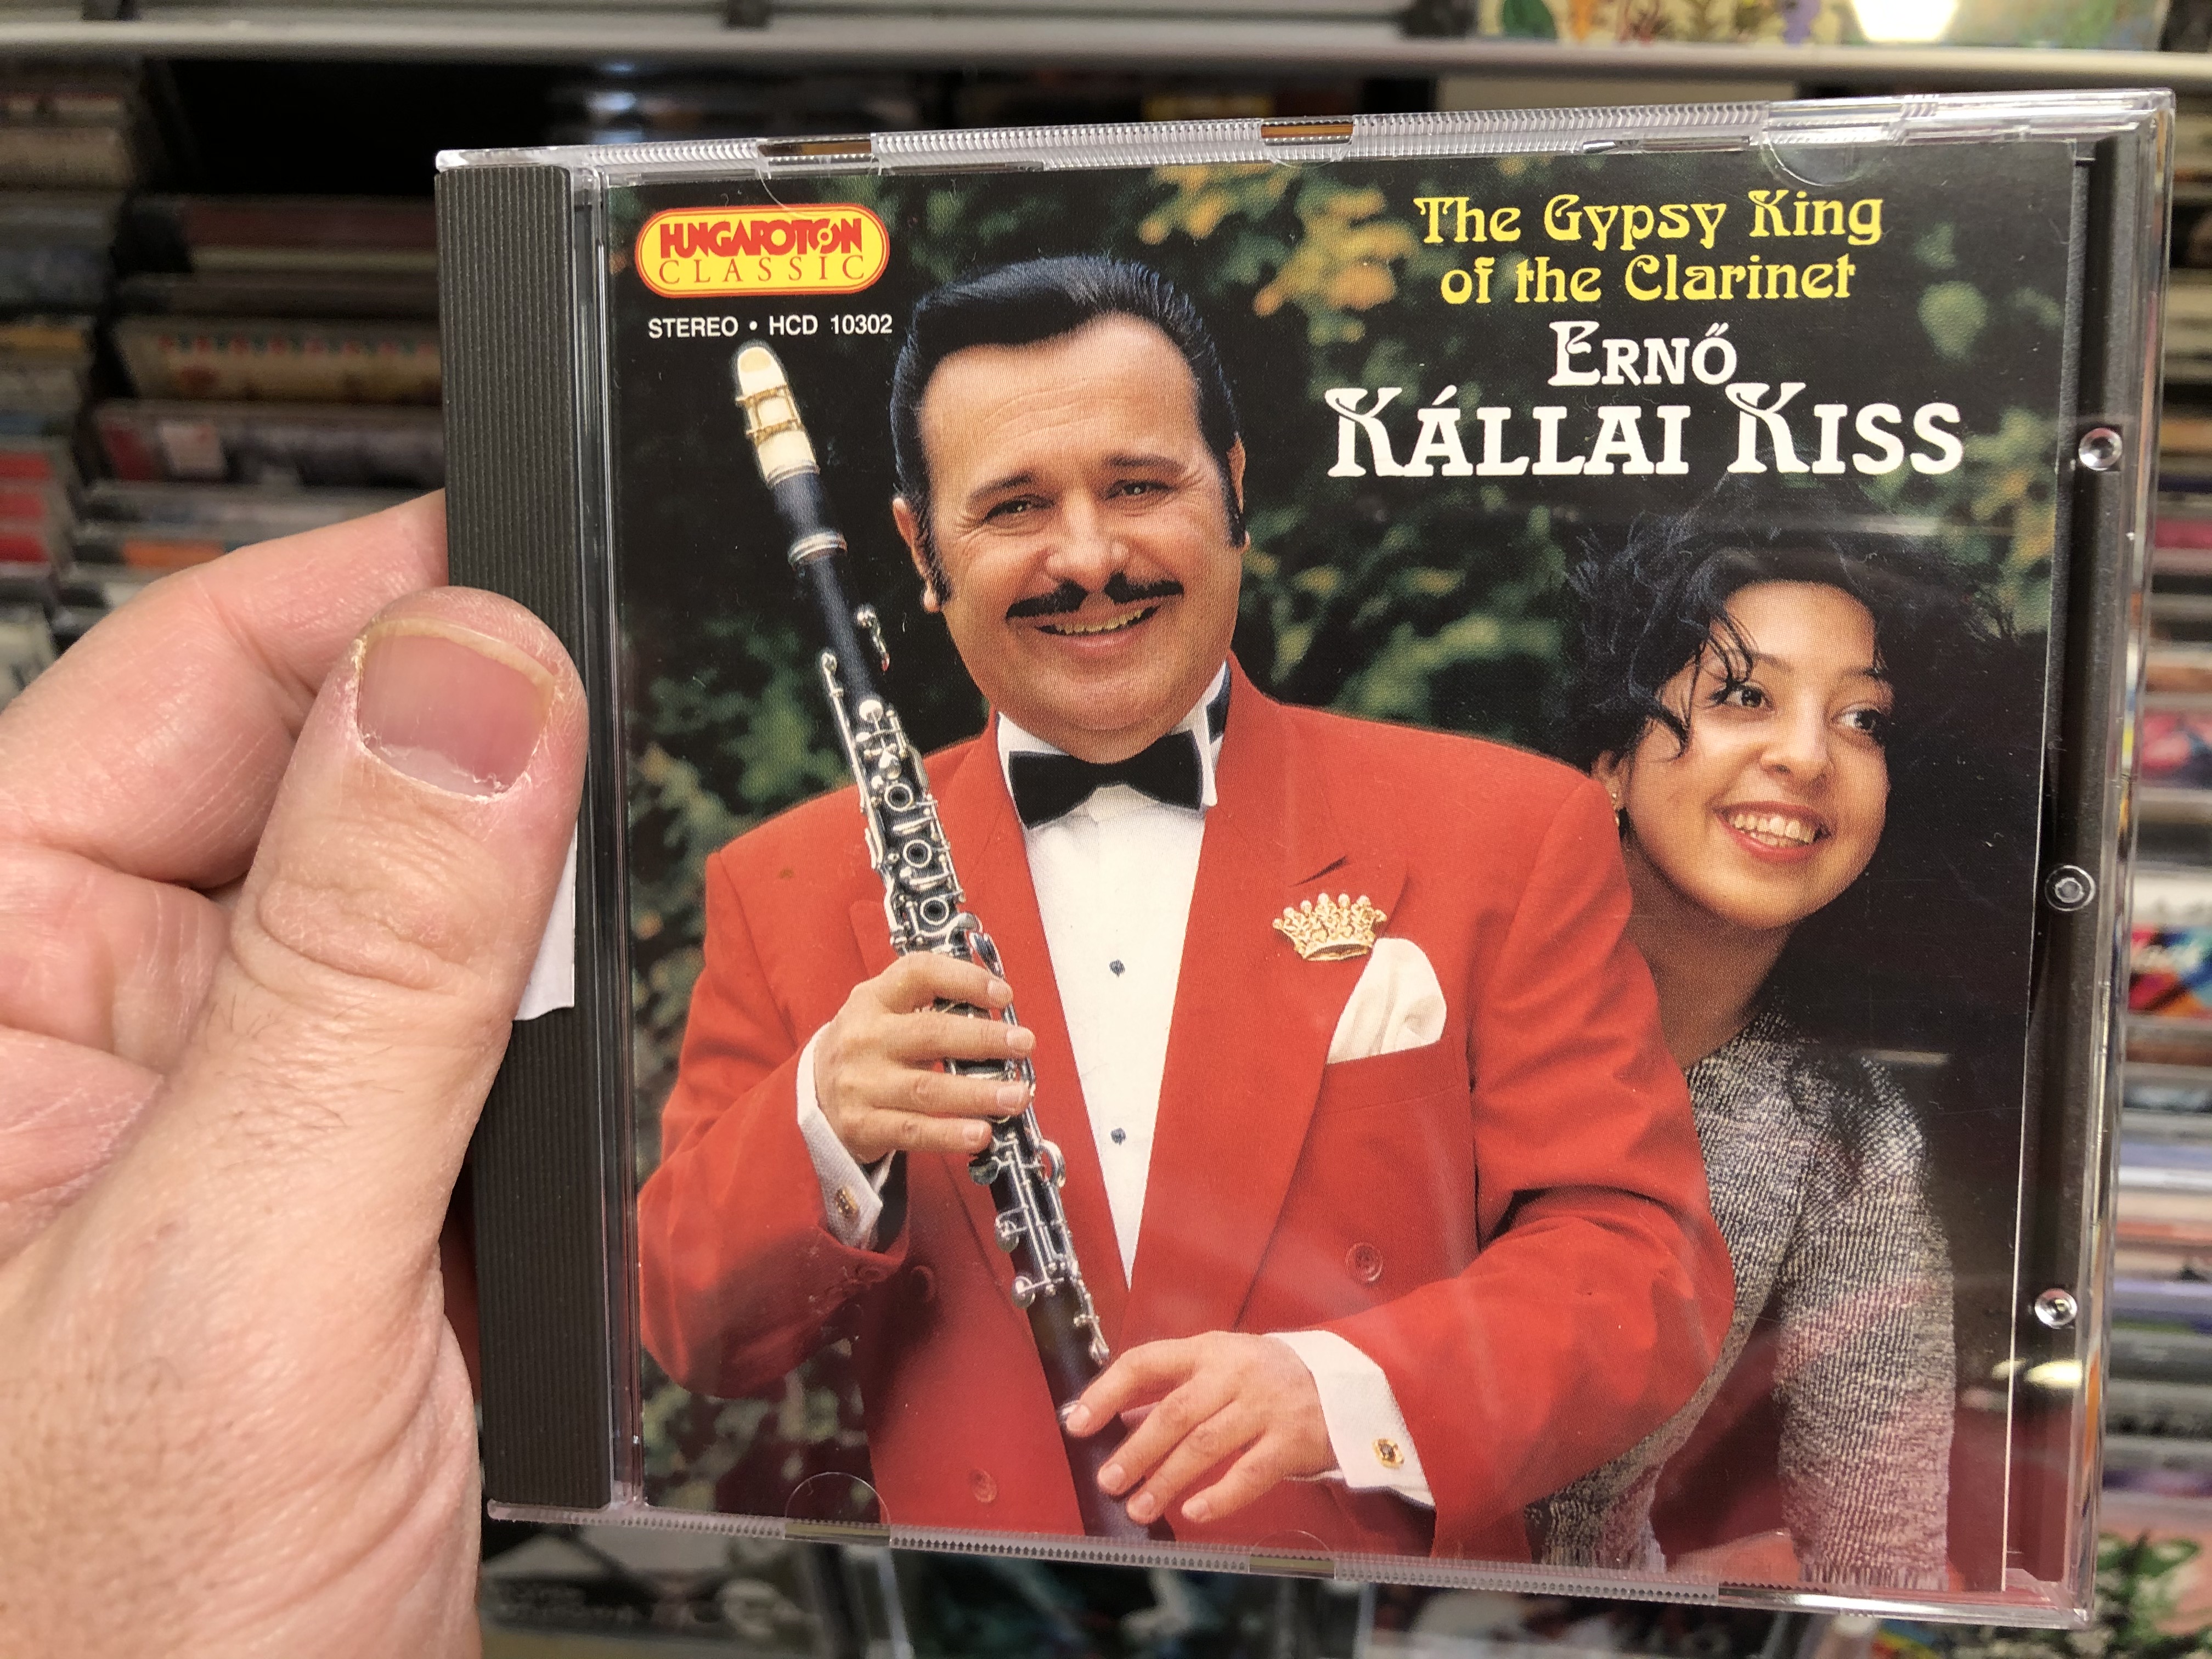 The Gypsy King of the Clarinet - Ernő Kállai Kiss / Hungaroton Classic  Audio CD 1995 Stereo / HCD 10302 - Bible in My Language